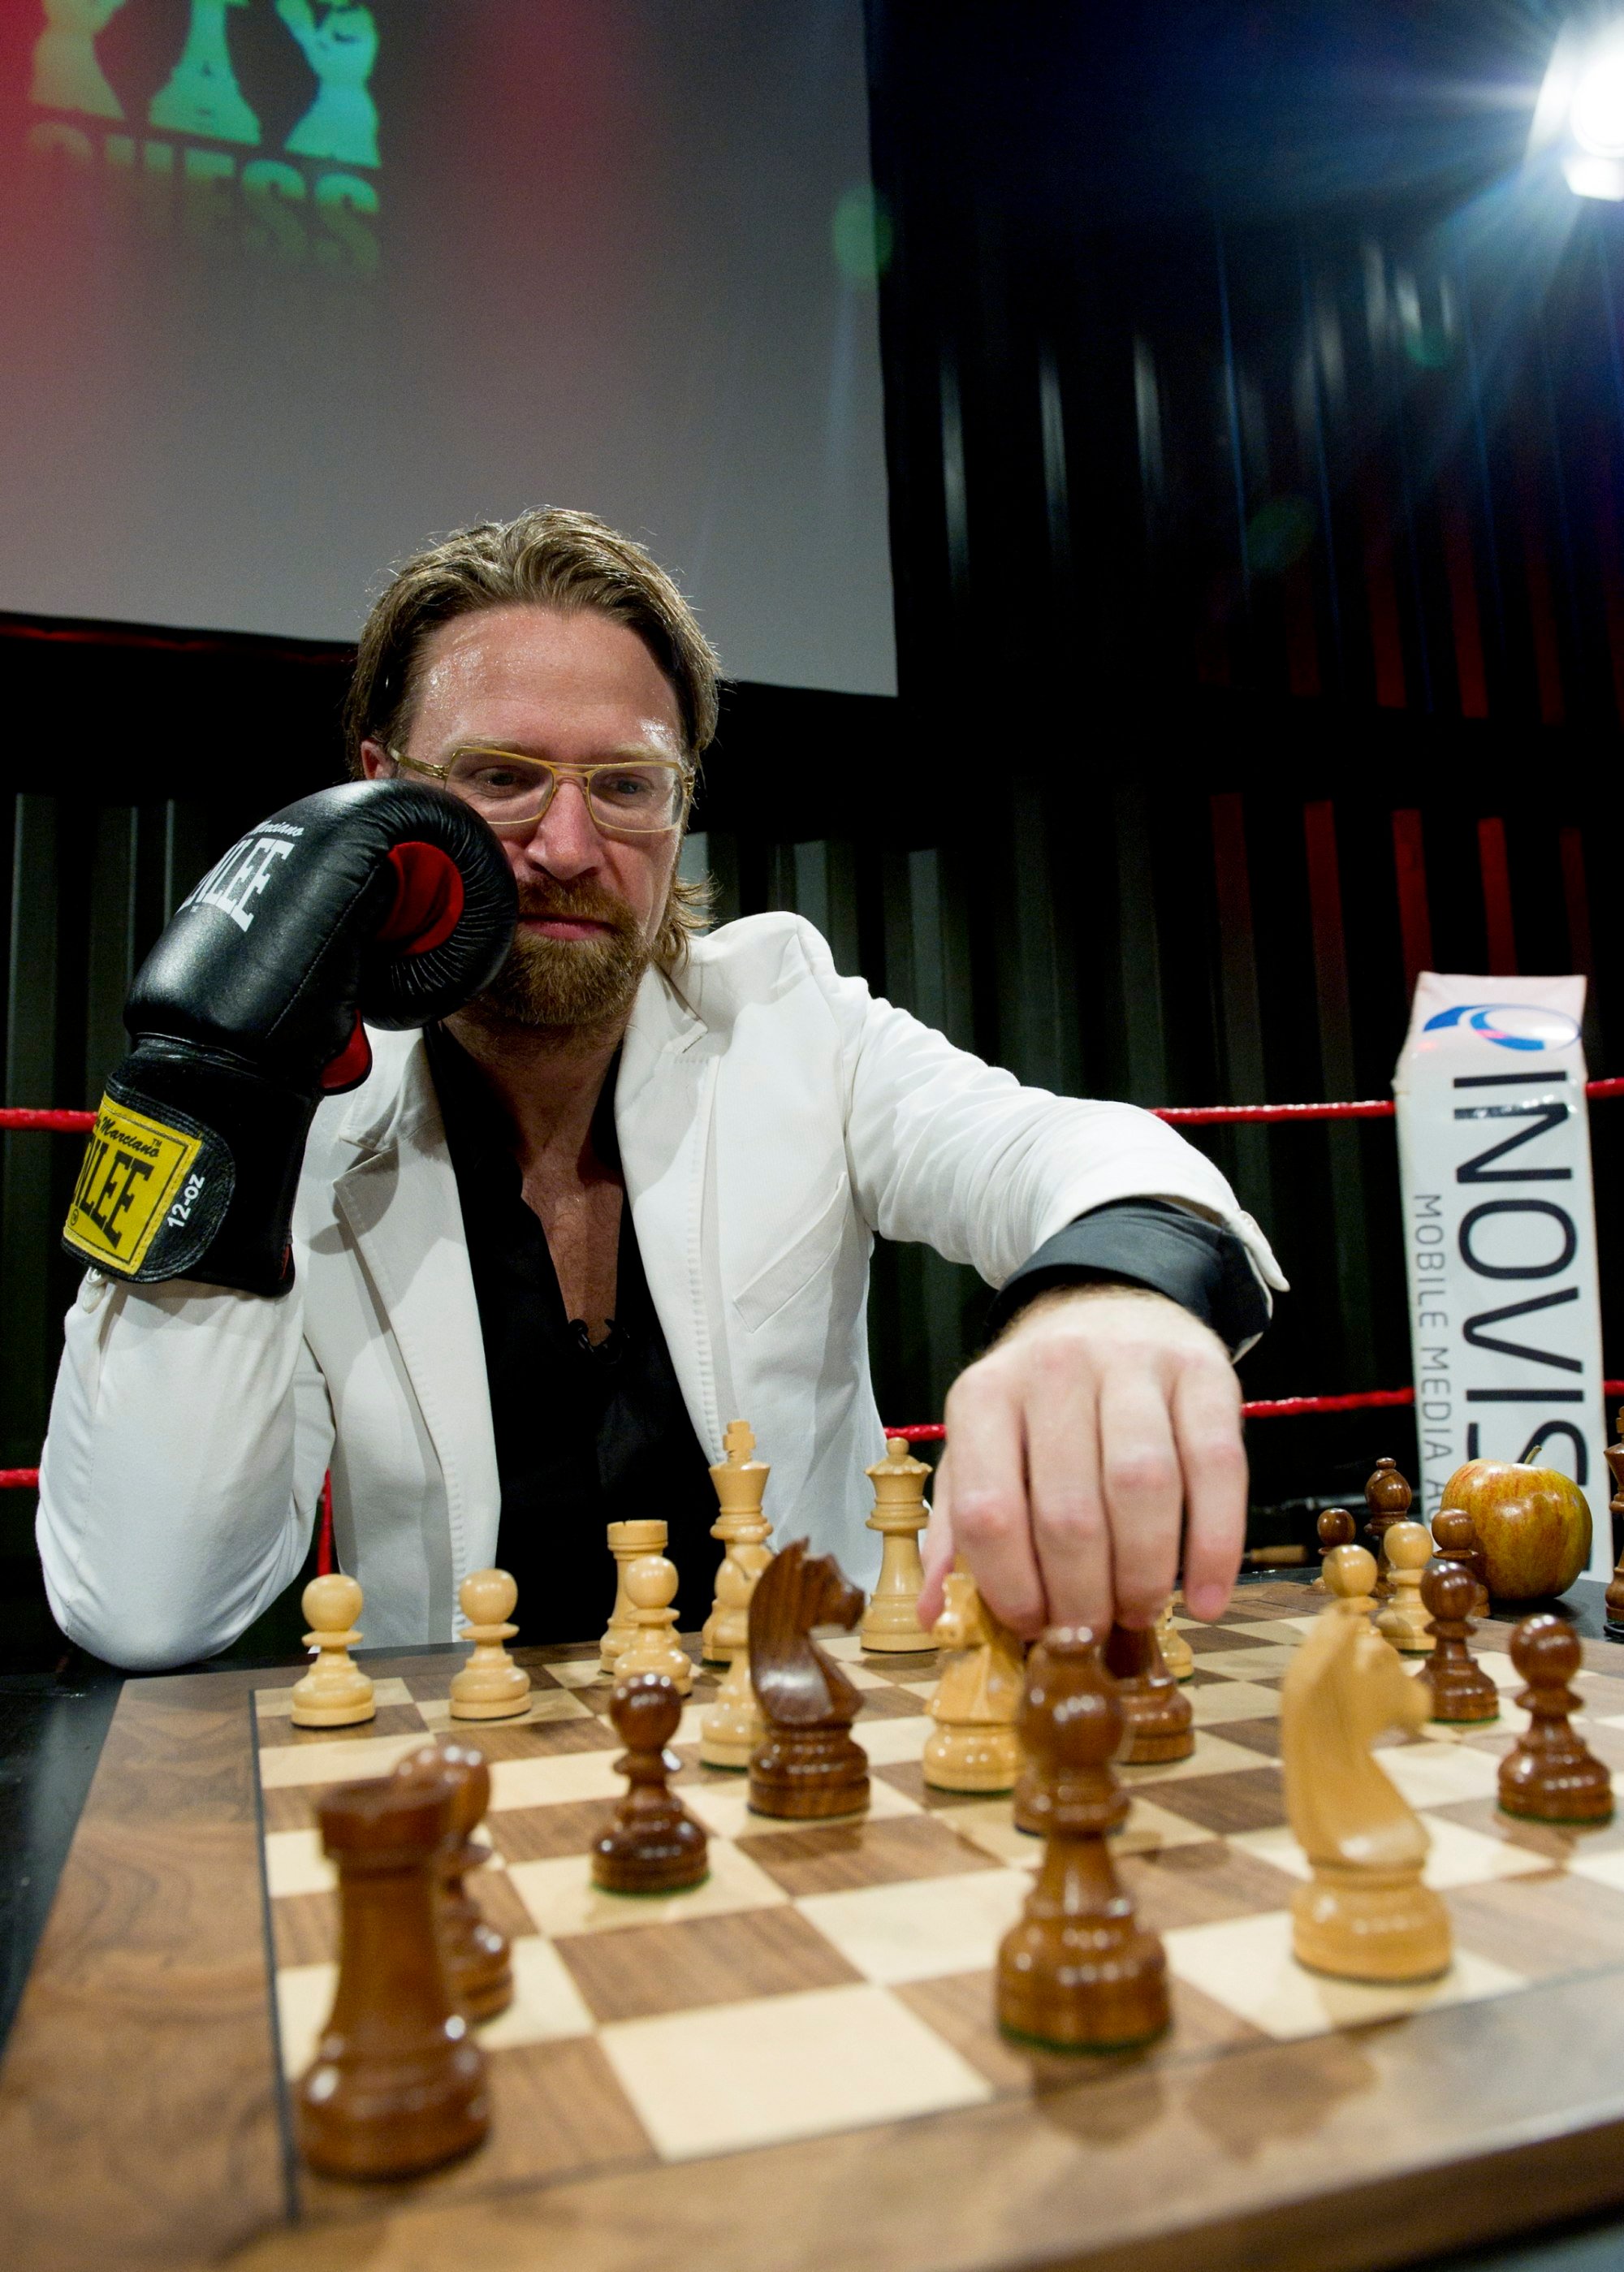 What's the Deal with Chess Boxing?